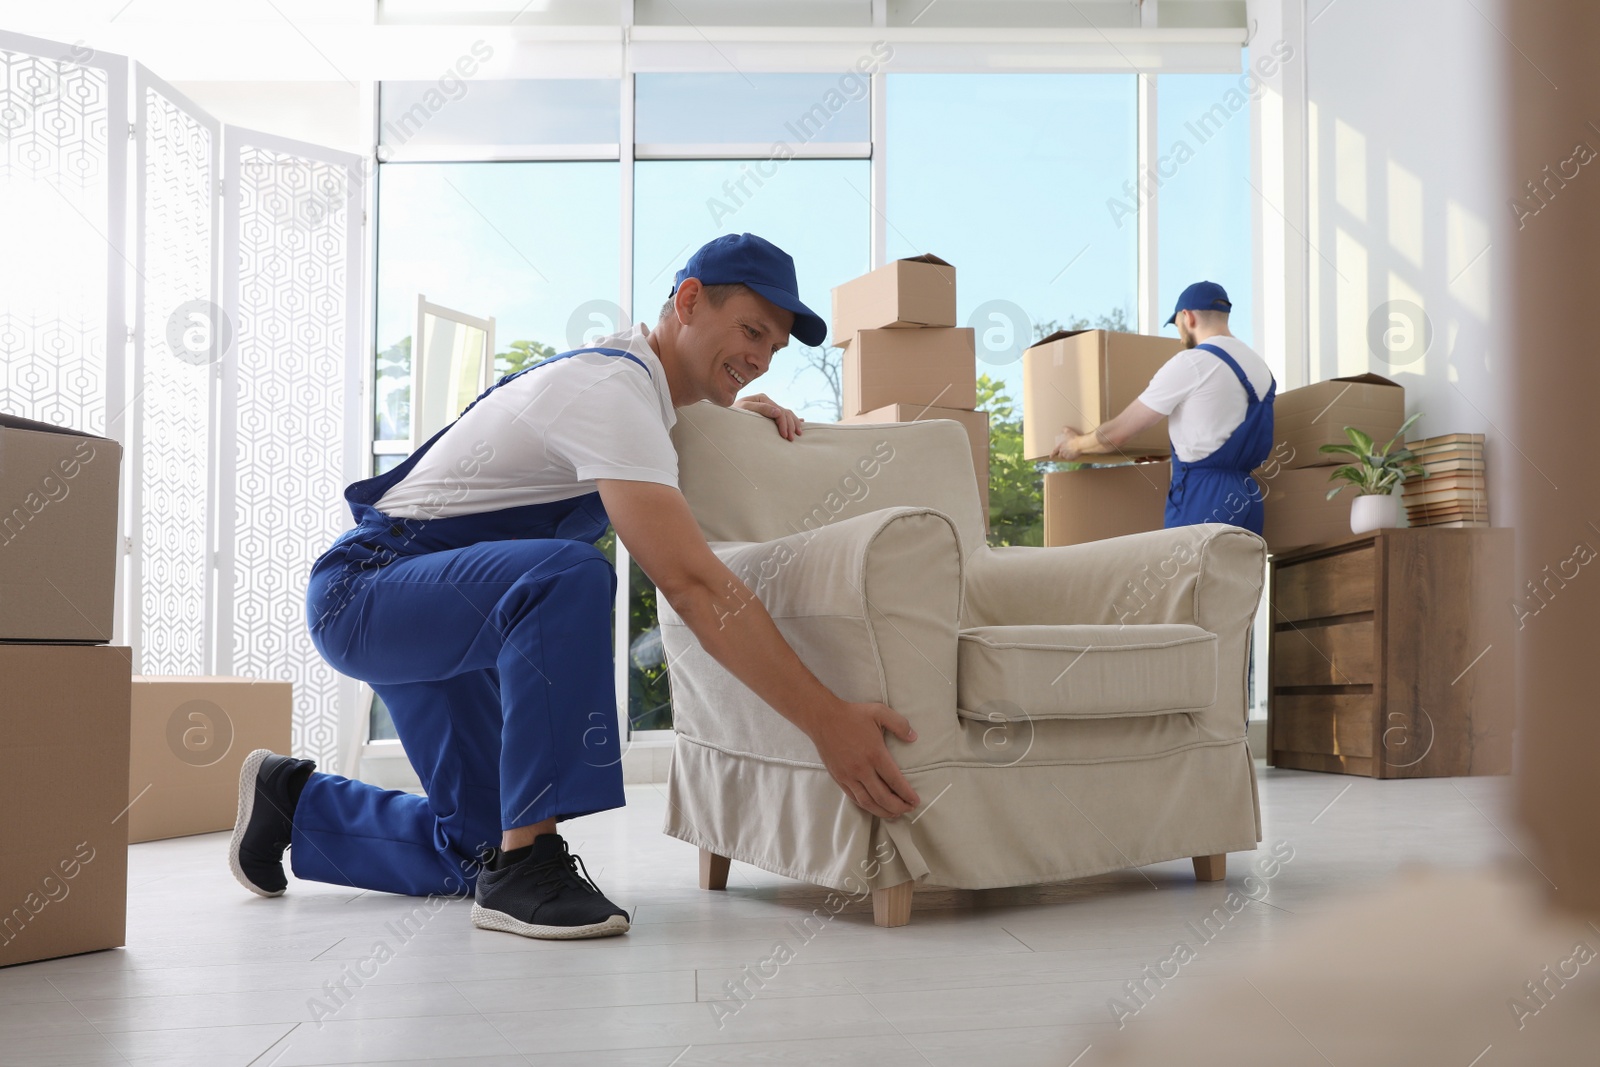 Photo of Moving service employees with armchair and cardboard boxes in room